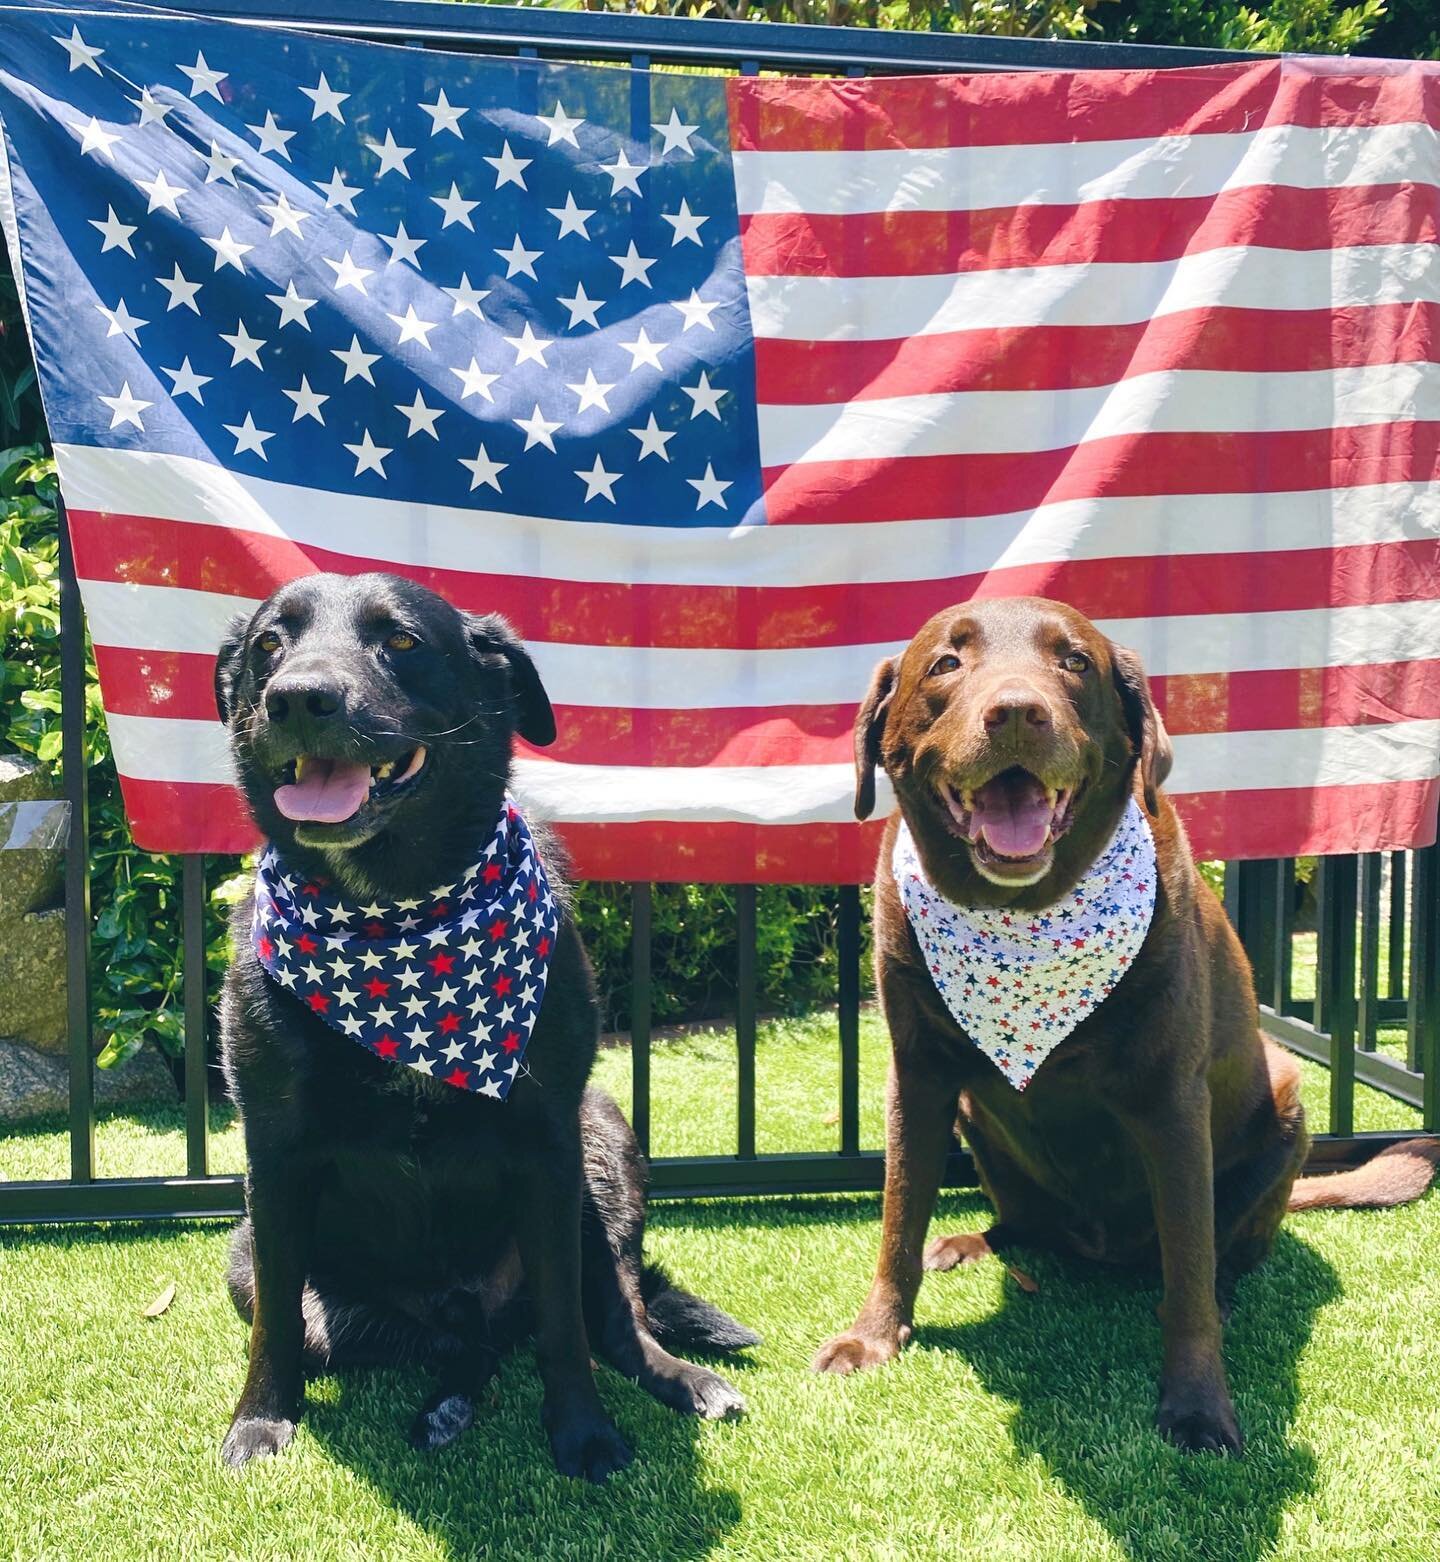 Happy Birthday America! 🎂🇺🇸 
Have an awesome holiday weekend, and be safe out there everyone! 
Make sure you&rsquo;re comforting your pups 🐶 and keeping an eye on them, as many will be frightened by the fireworks 🧨